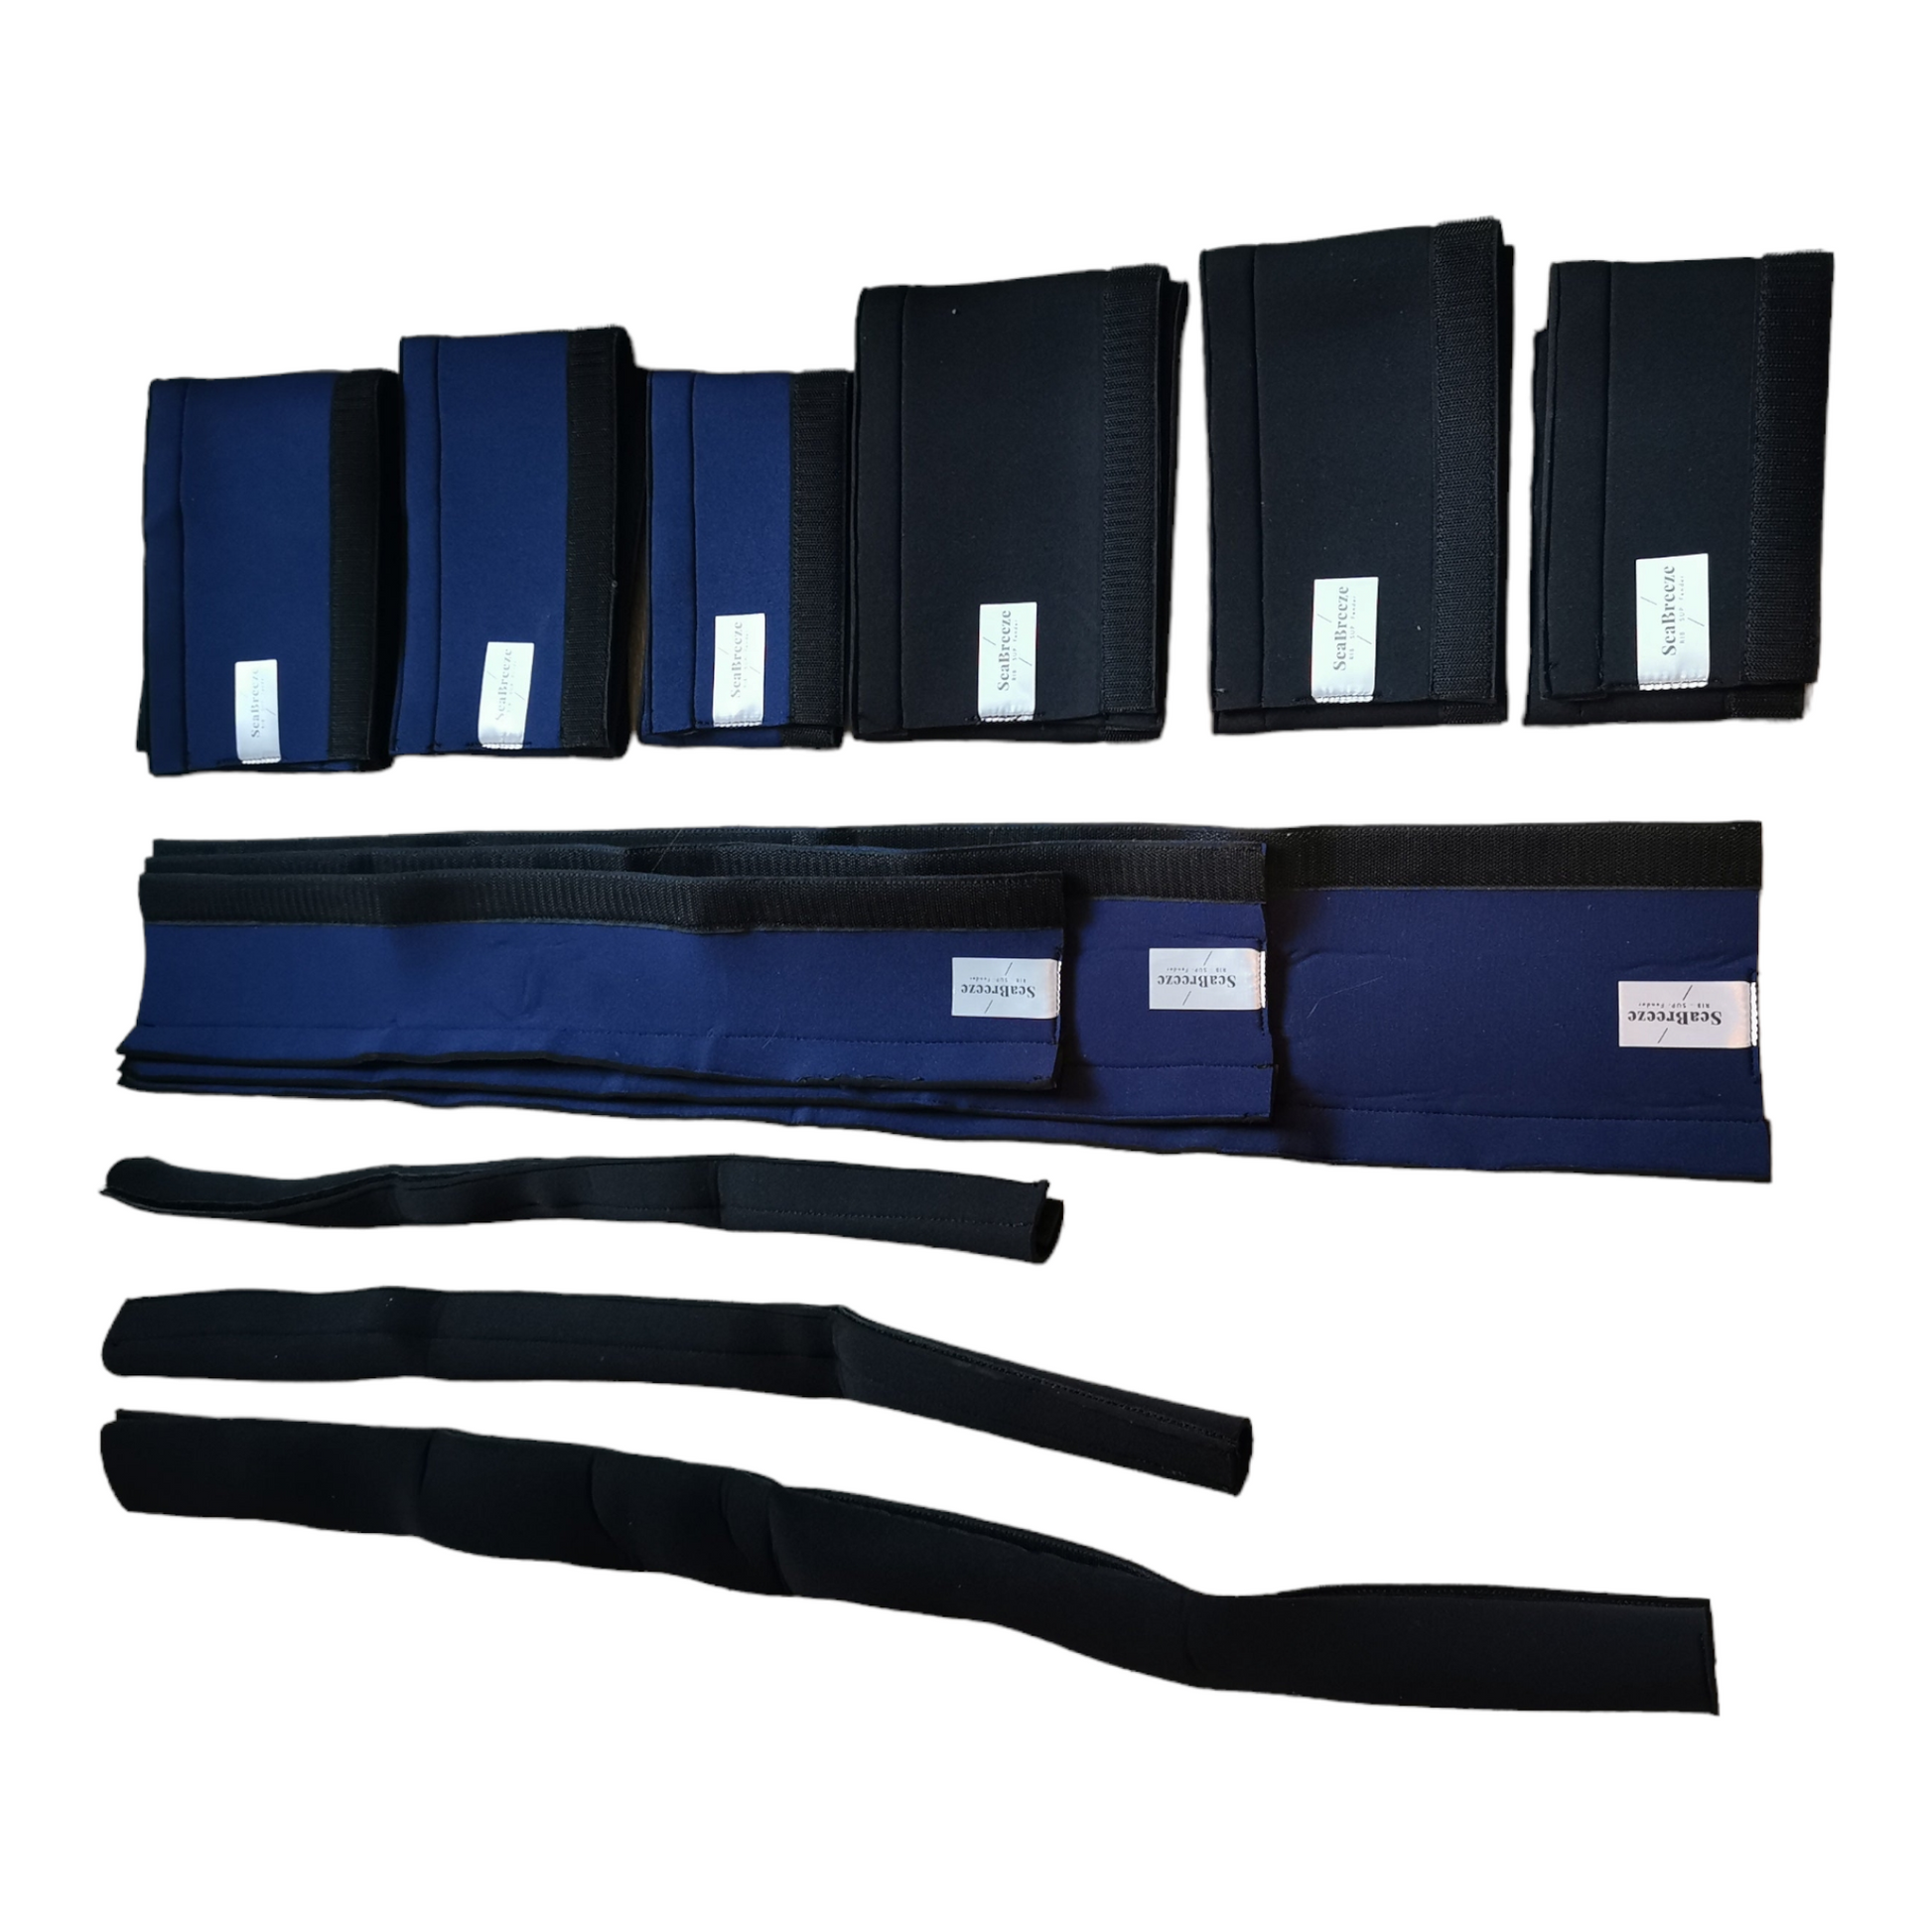 SeaBreeze chafe guard collection in black and blue with white logo